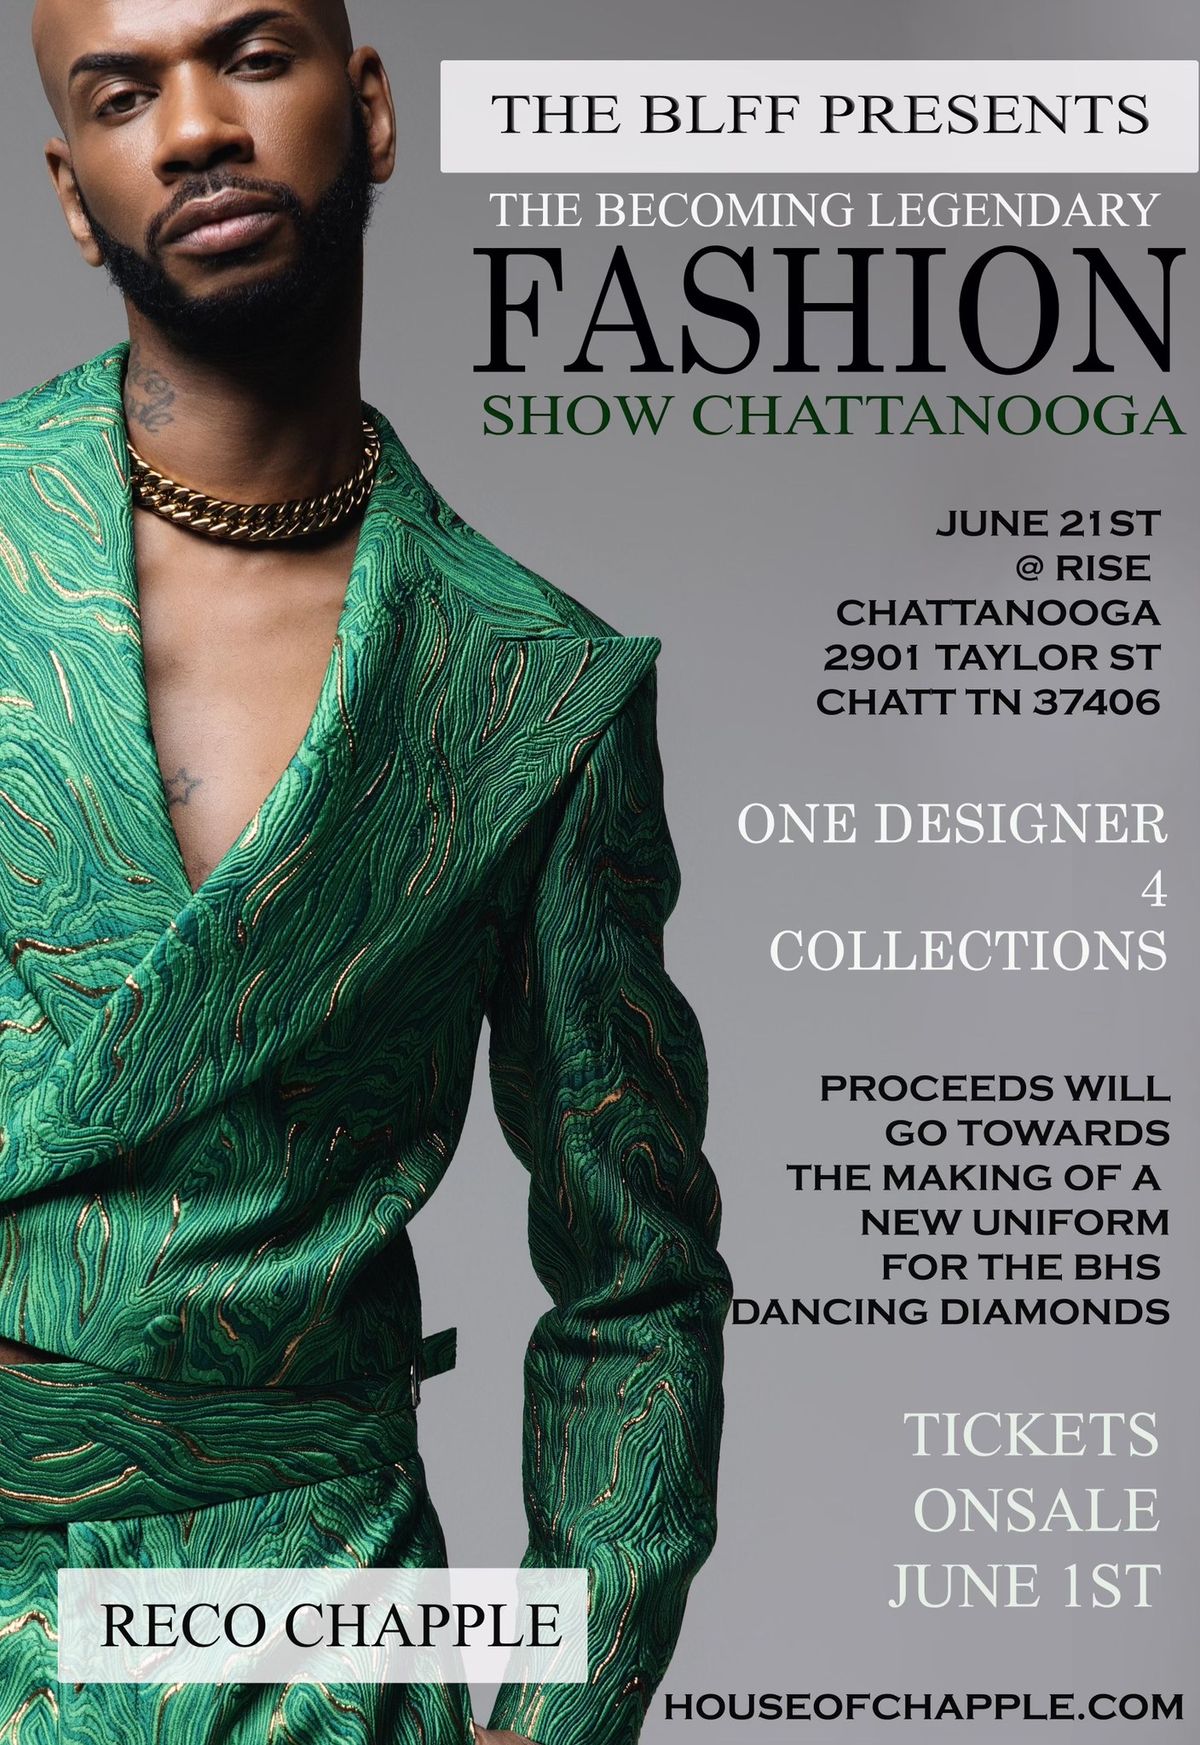 THE BECOMING LEGENDARY FASHION SHOW, Chattanooga